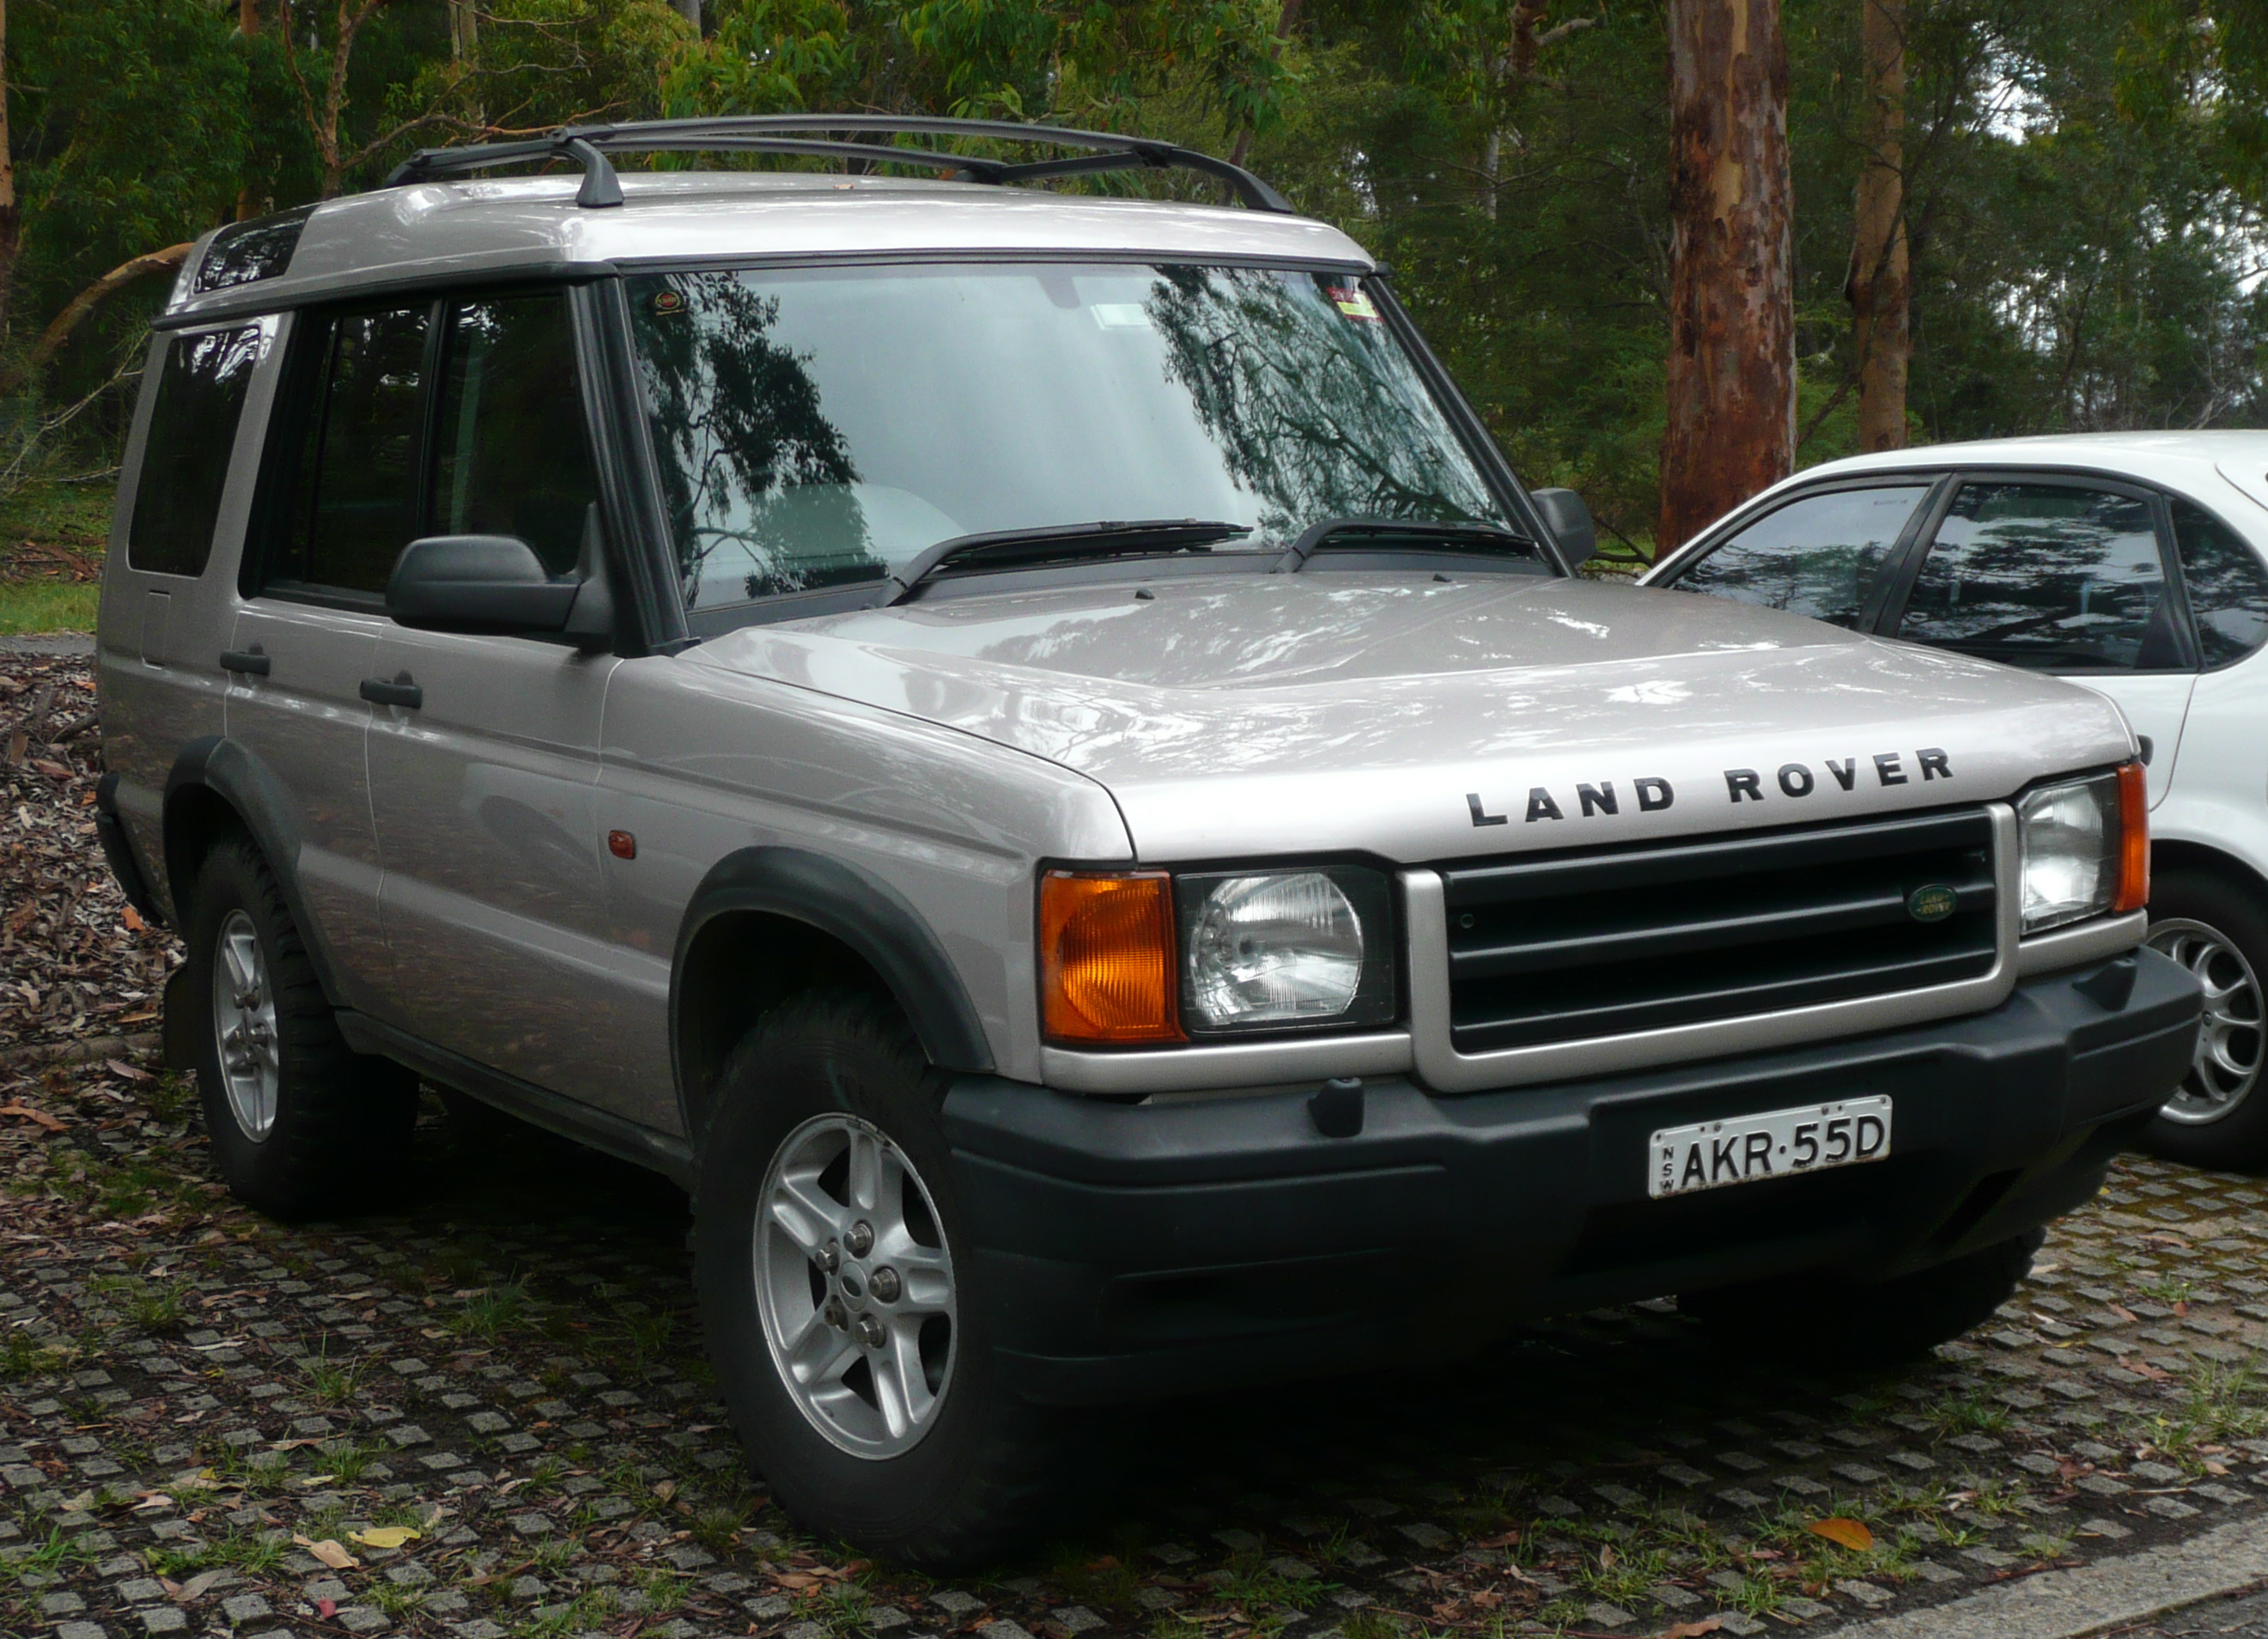 1999 Land Rover Range Rover VIN Number Search AutoDetective